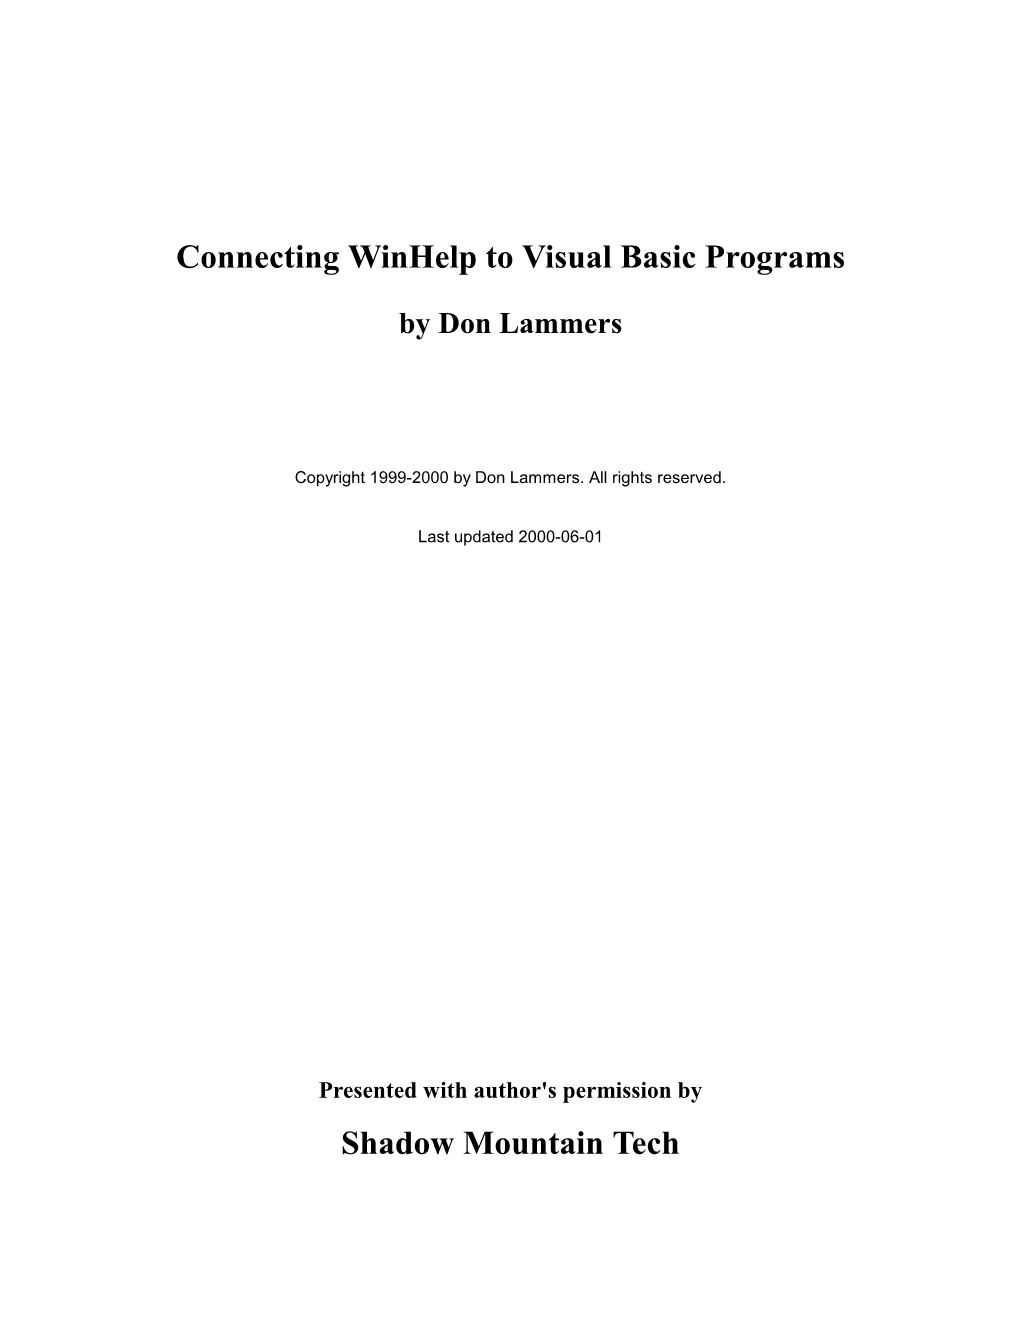 Connecting Winhelp to Visual Basic Programs